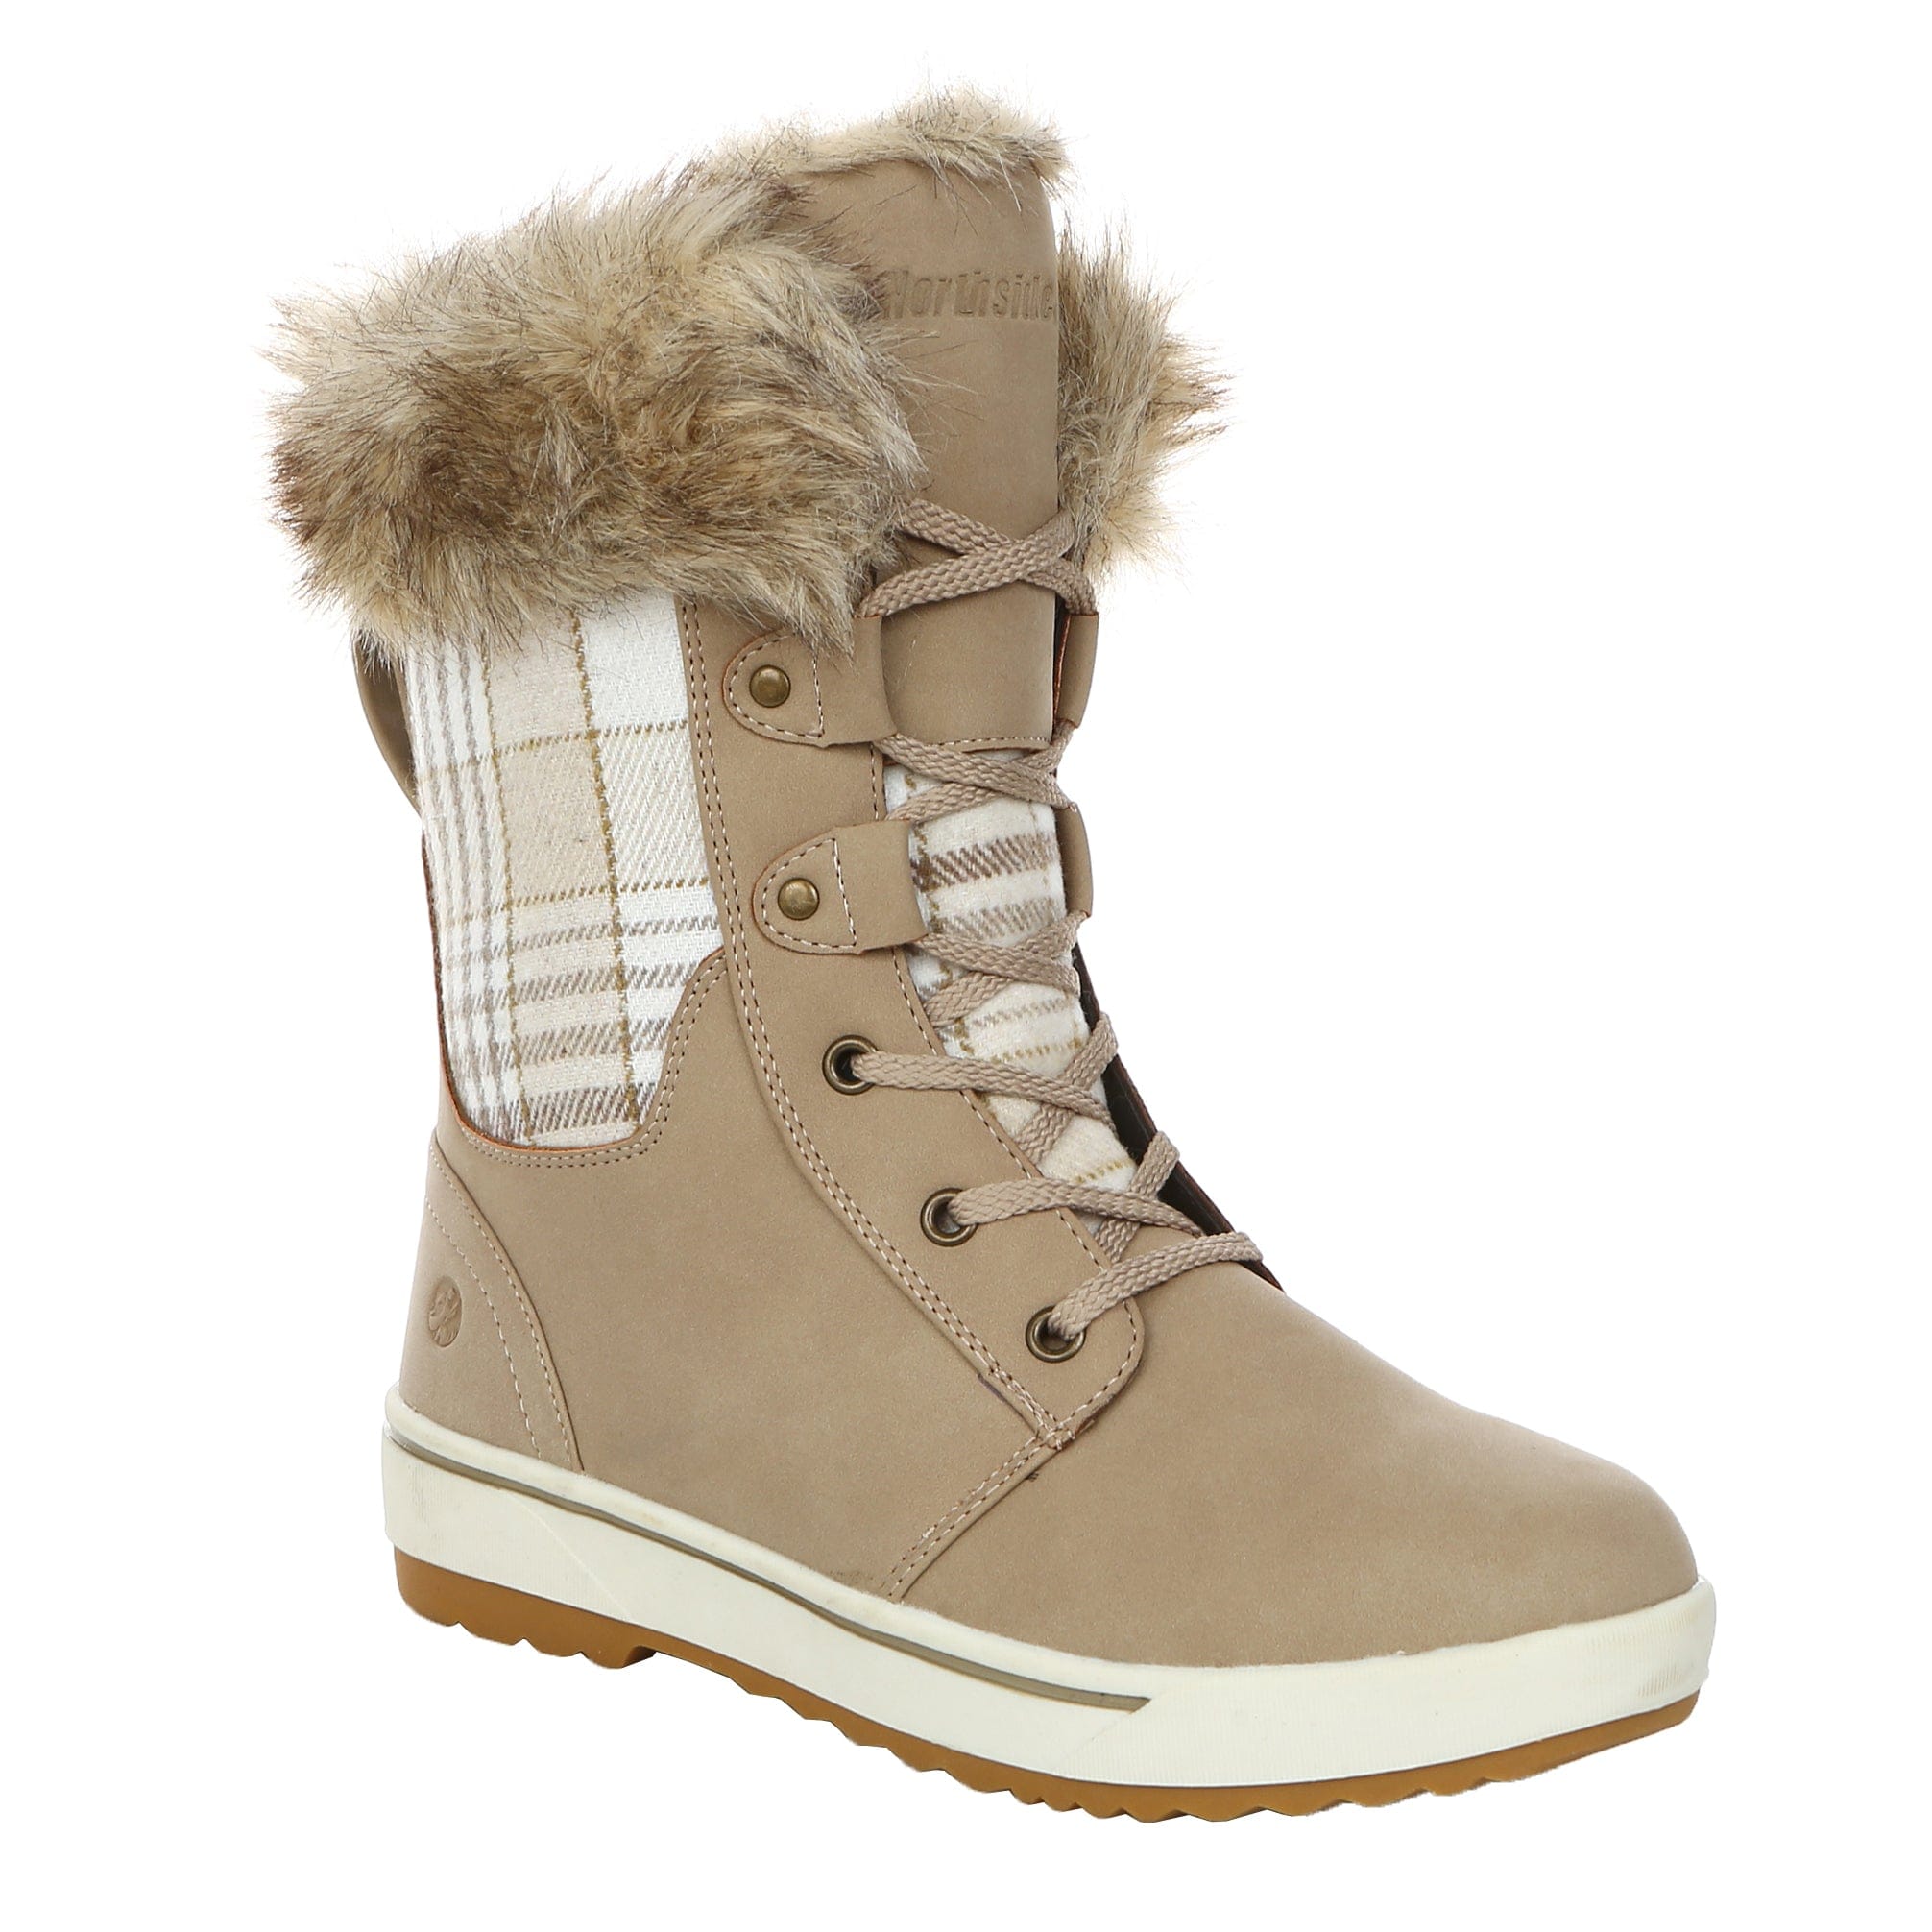 Quealent Womens Snow Boots, Warm Fur Lined Waterproof